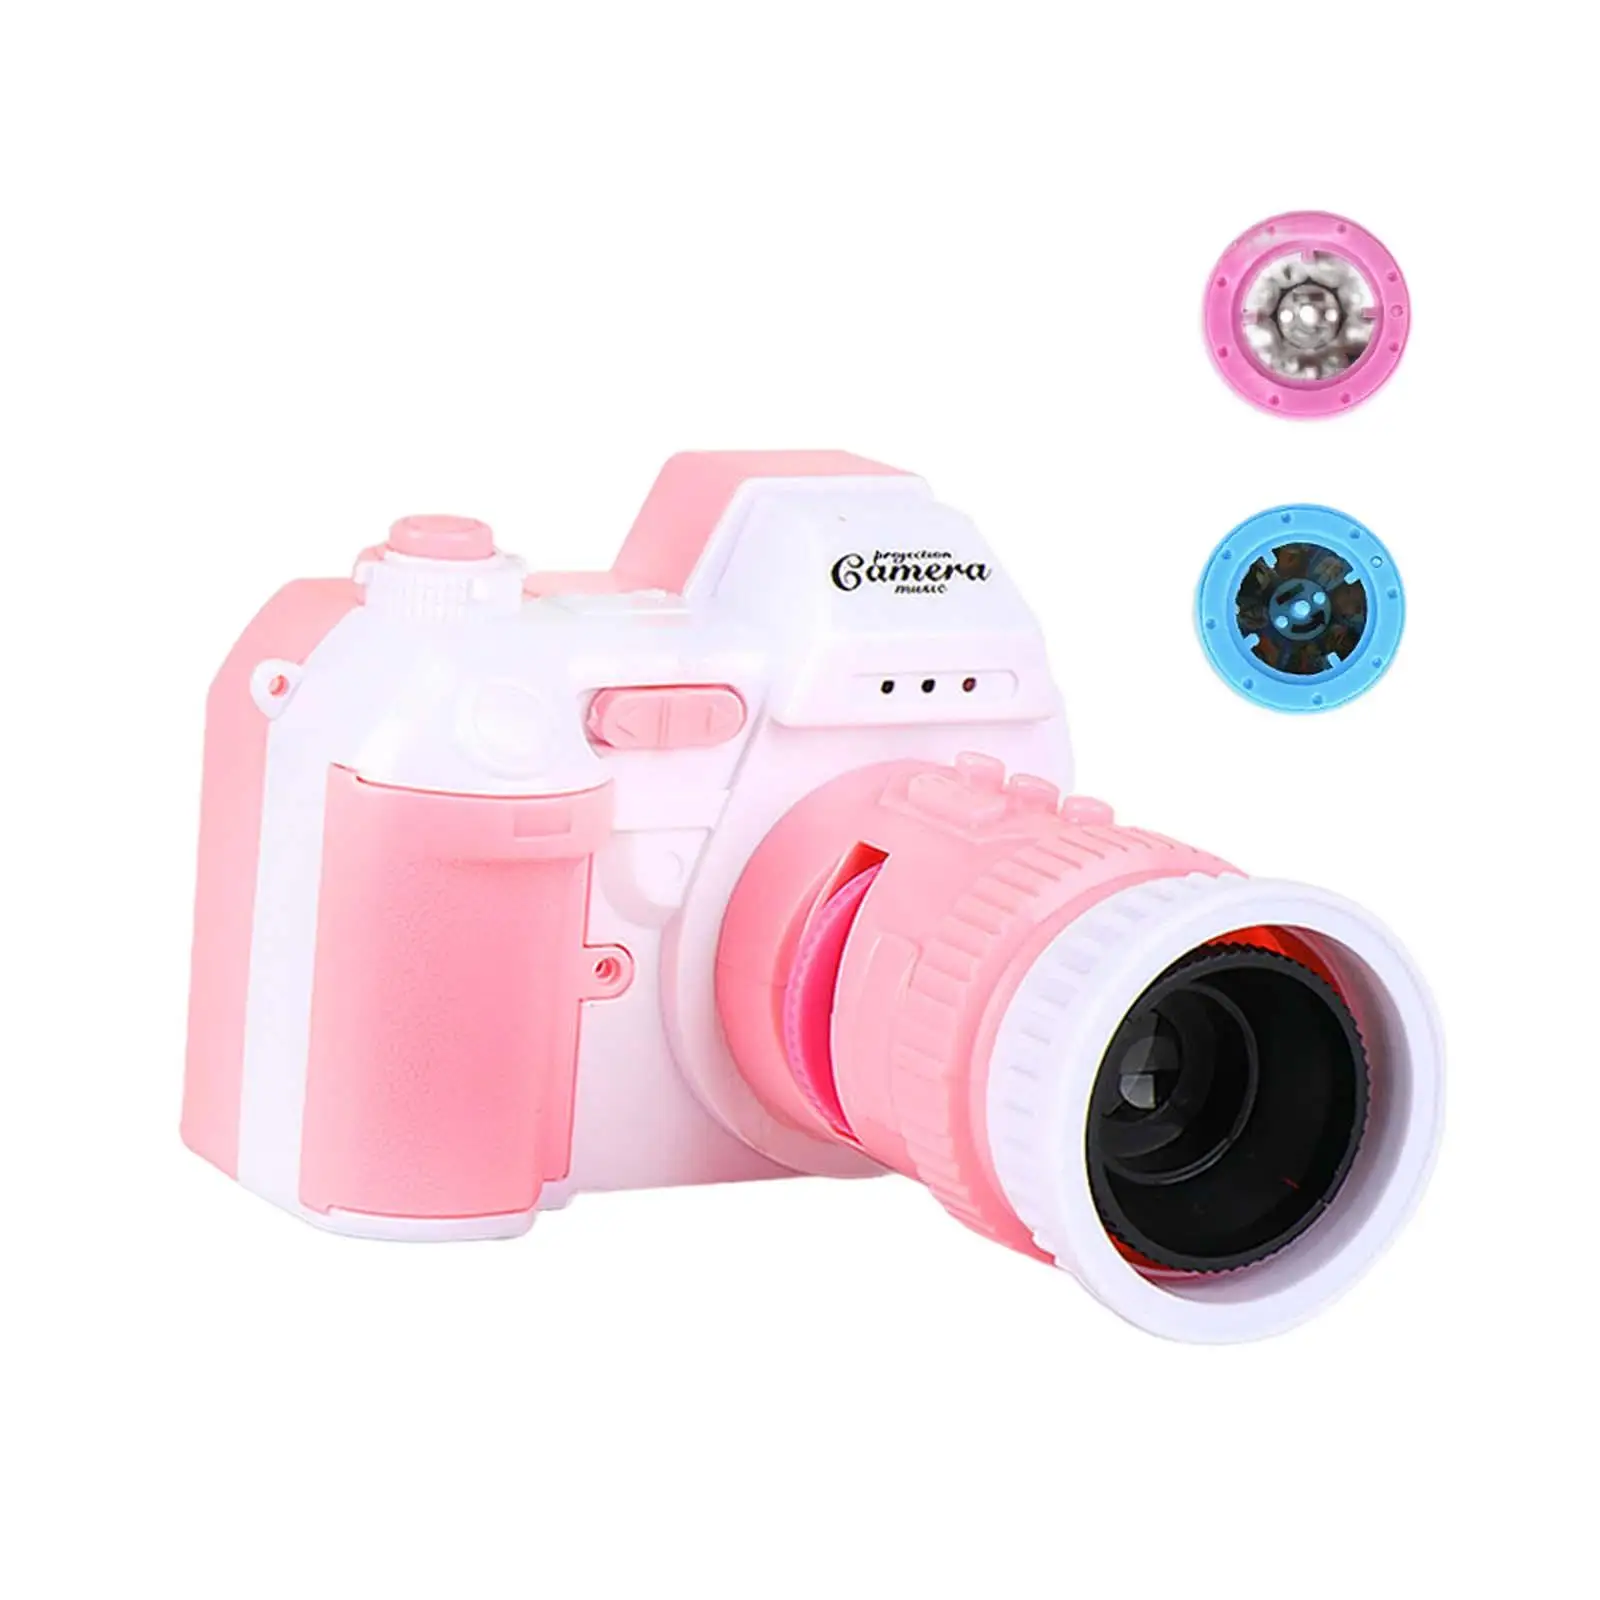 Portable Projection Camera Toy with Lights and Music for Children Day Age 3+